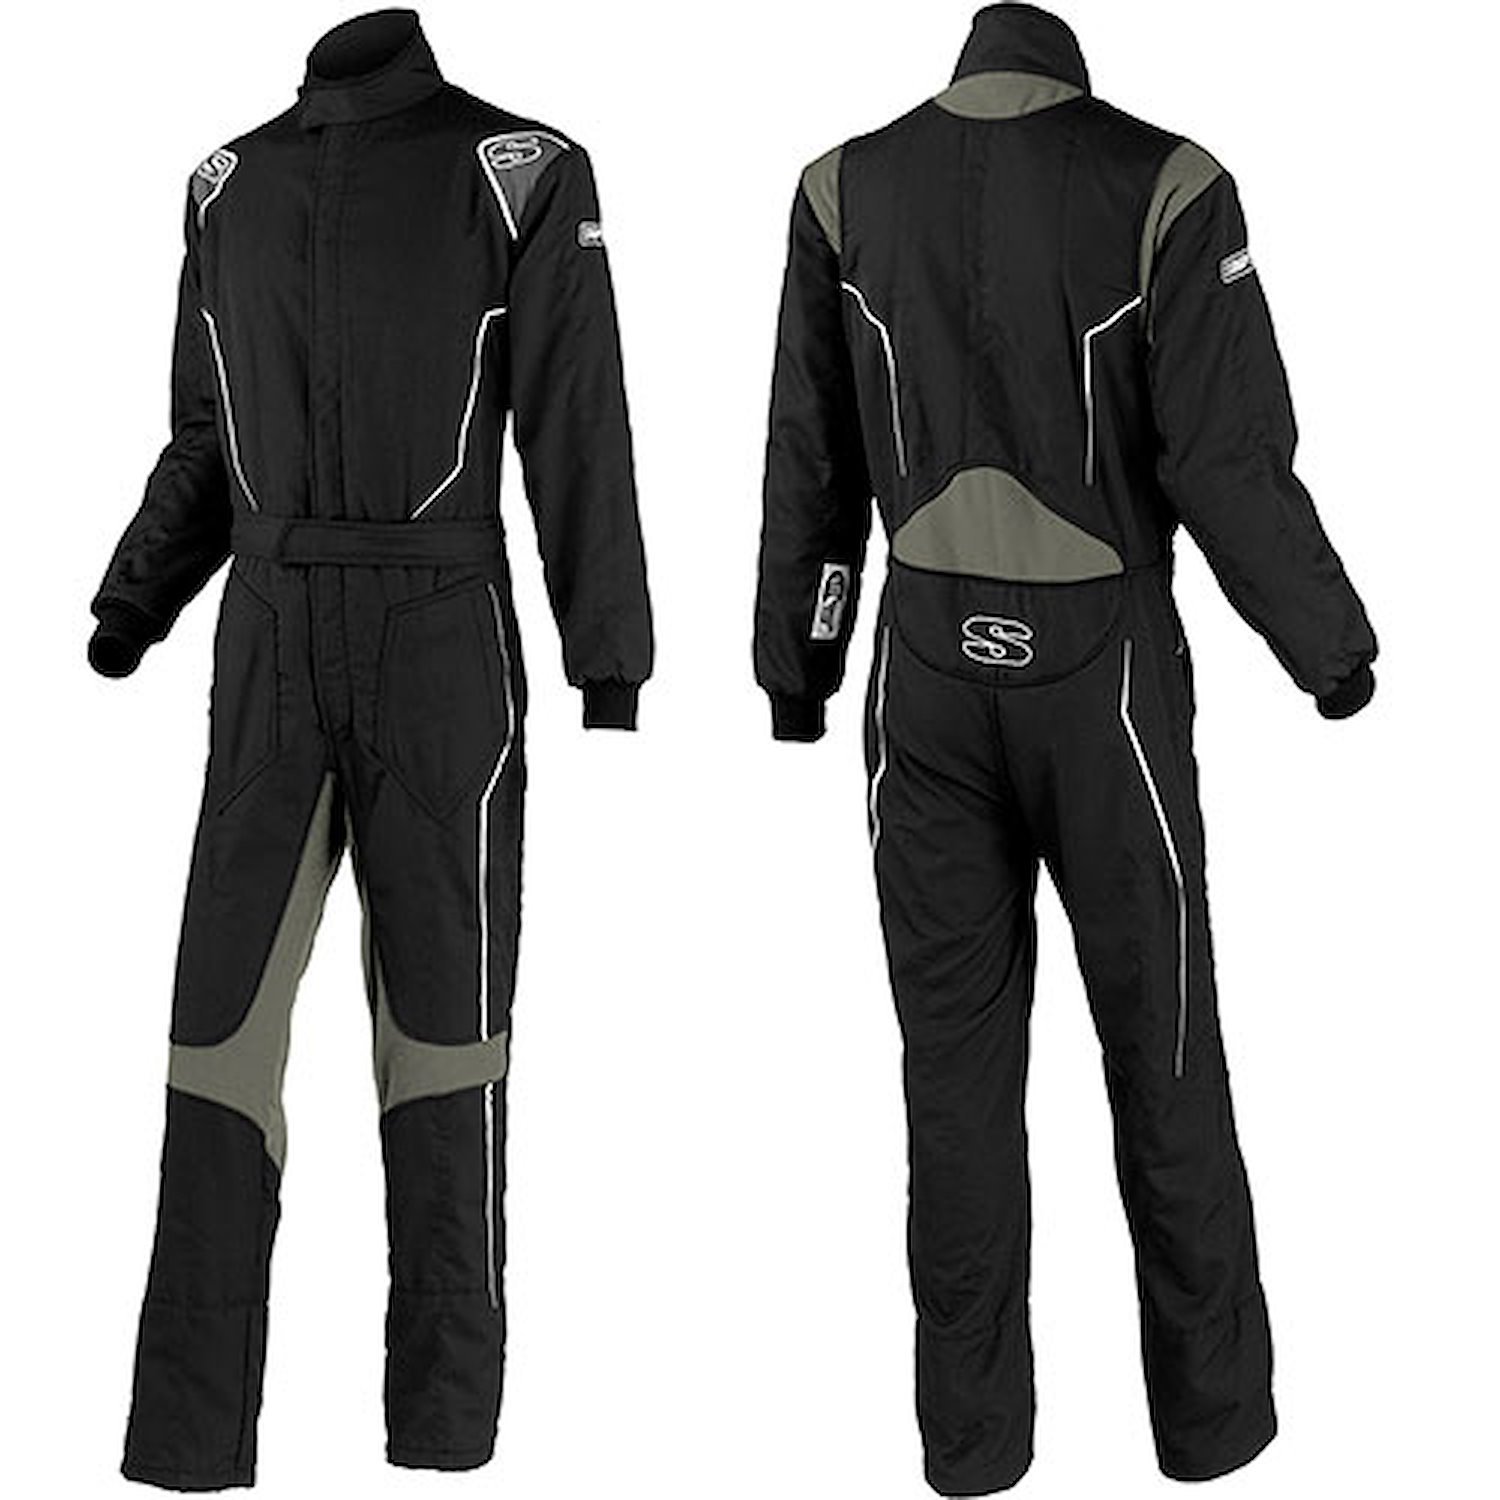 Helix Youth Racing Suit X-Large